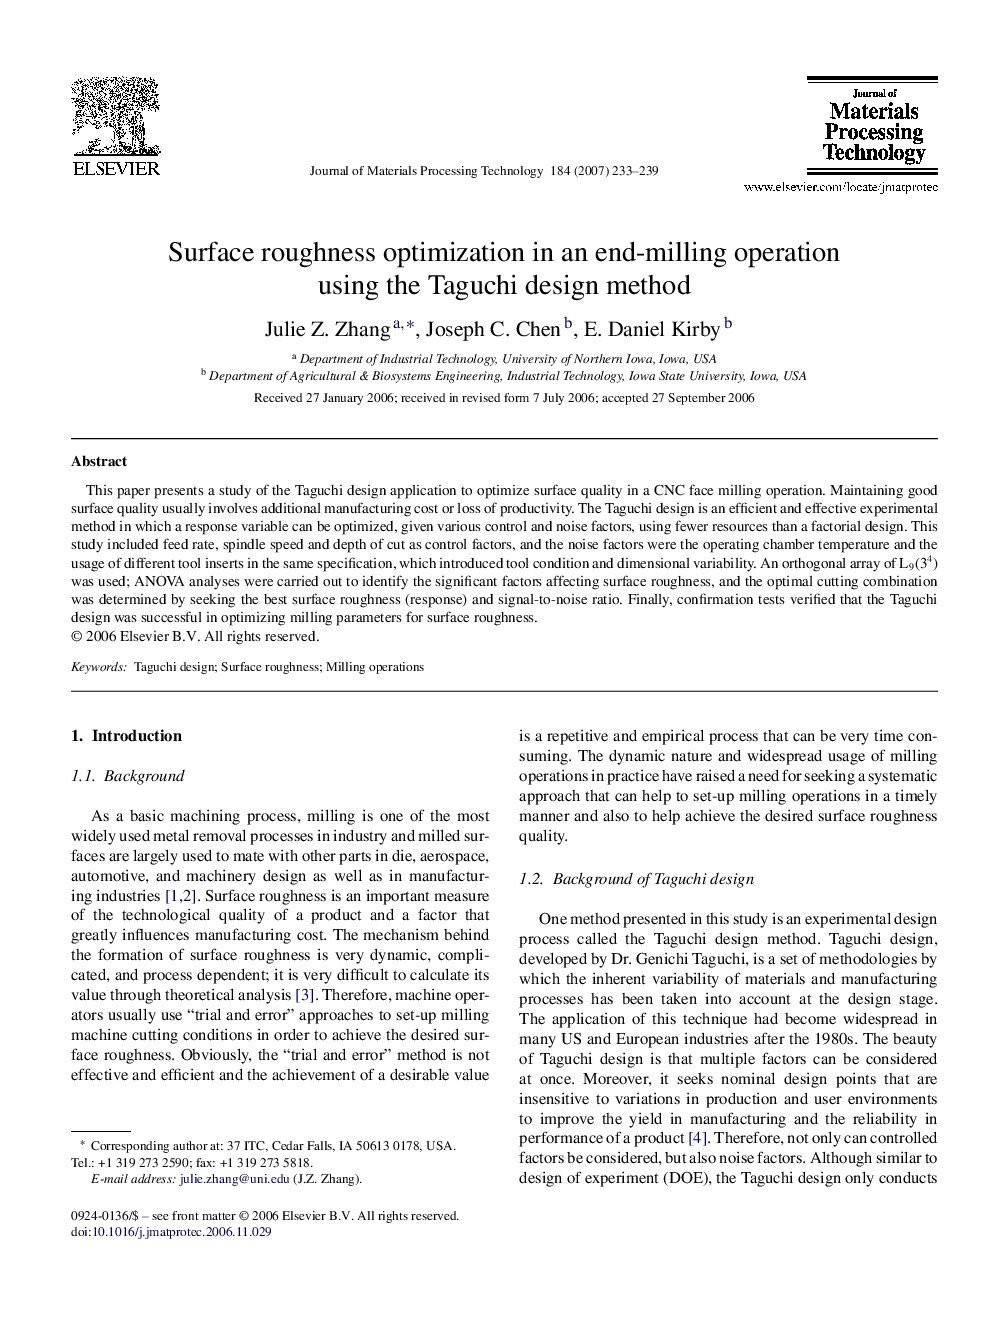 Surface roughness optimization in an end-milling operation using the Taguchi design method